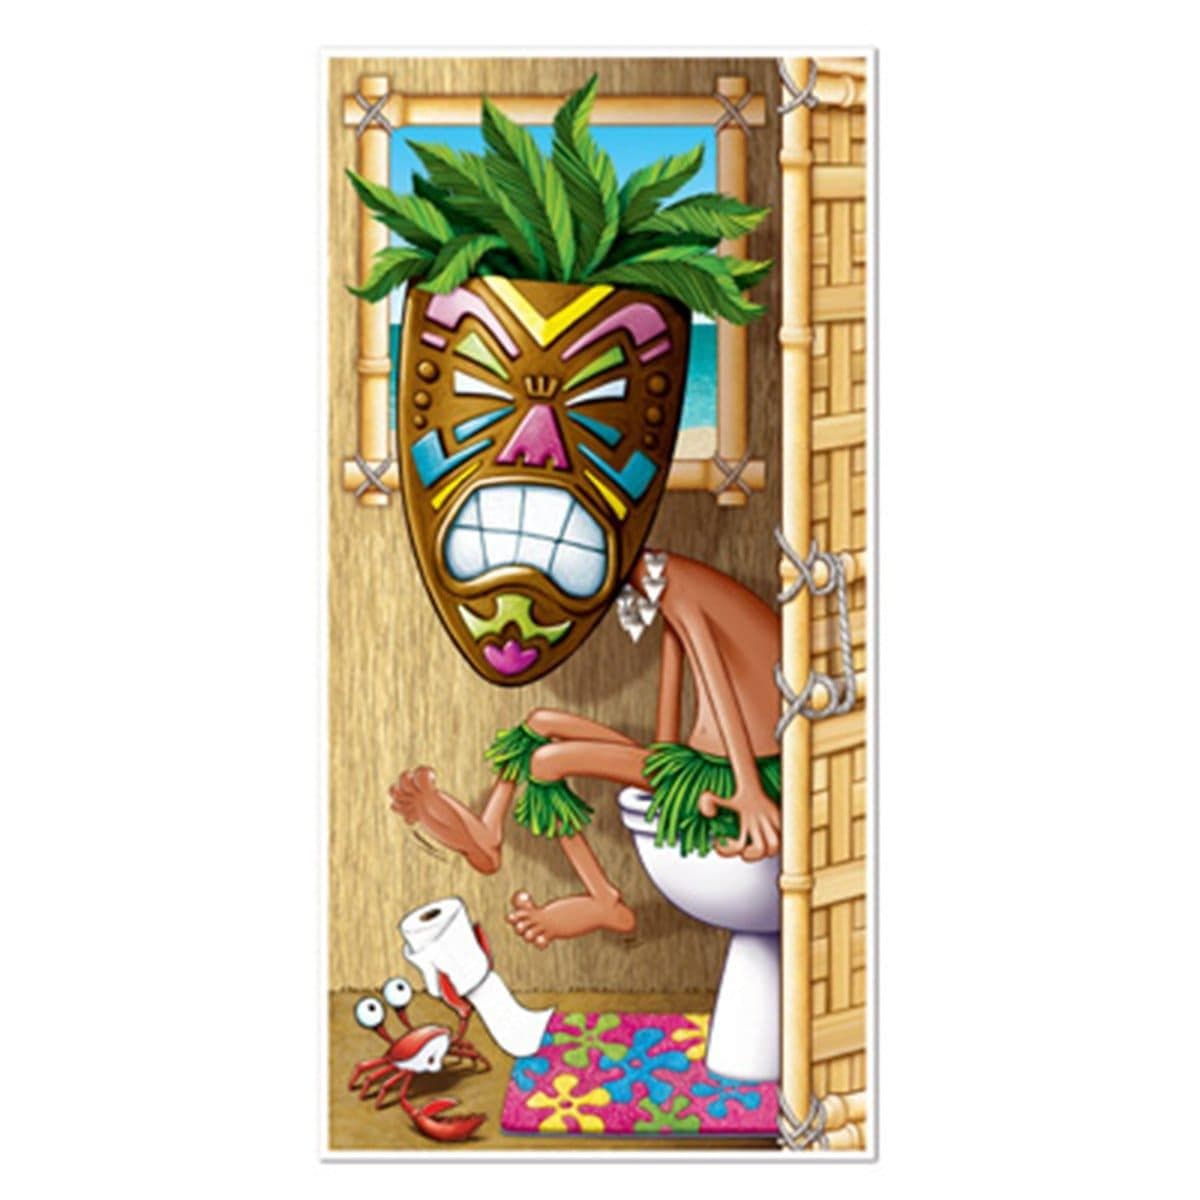 Buy Theme Party Tiki Man Restroom Door Decoration sold at Party Expert